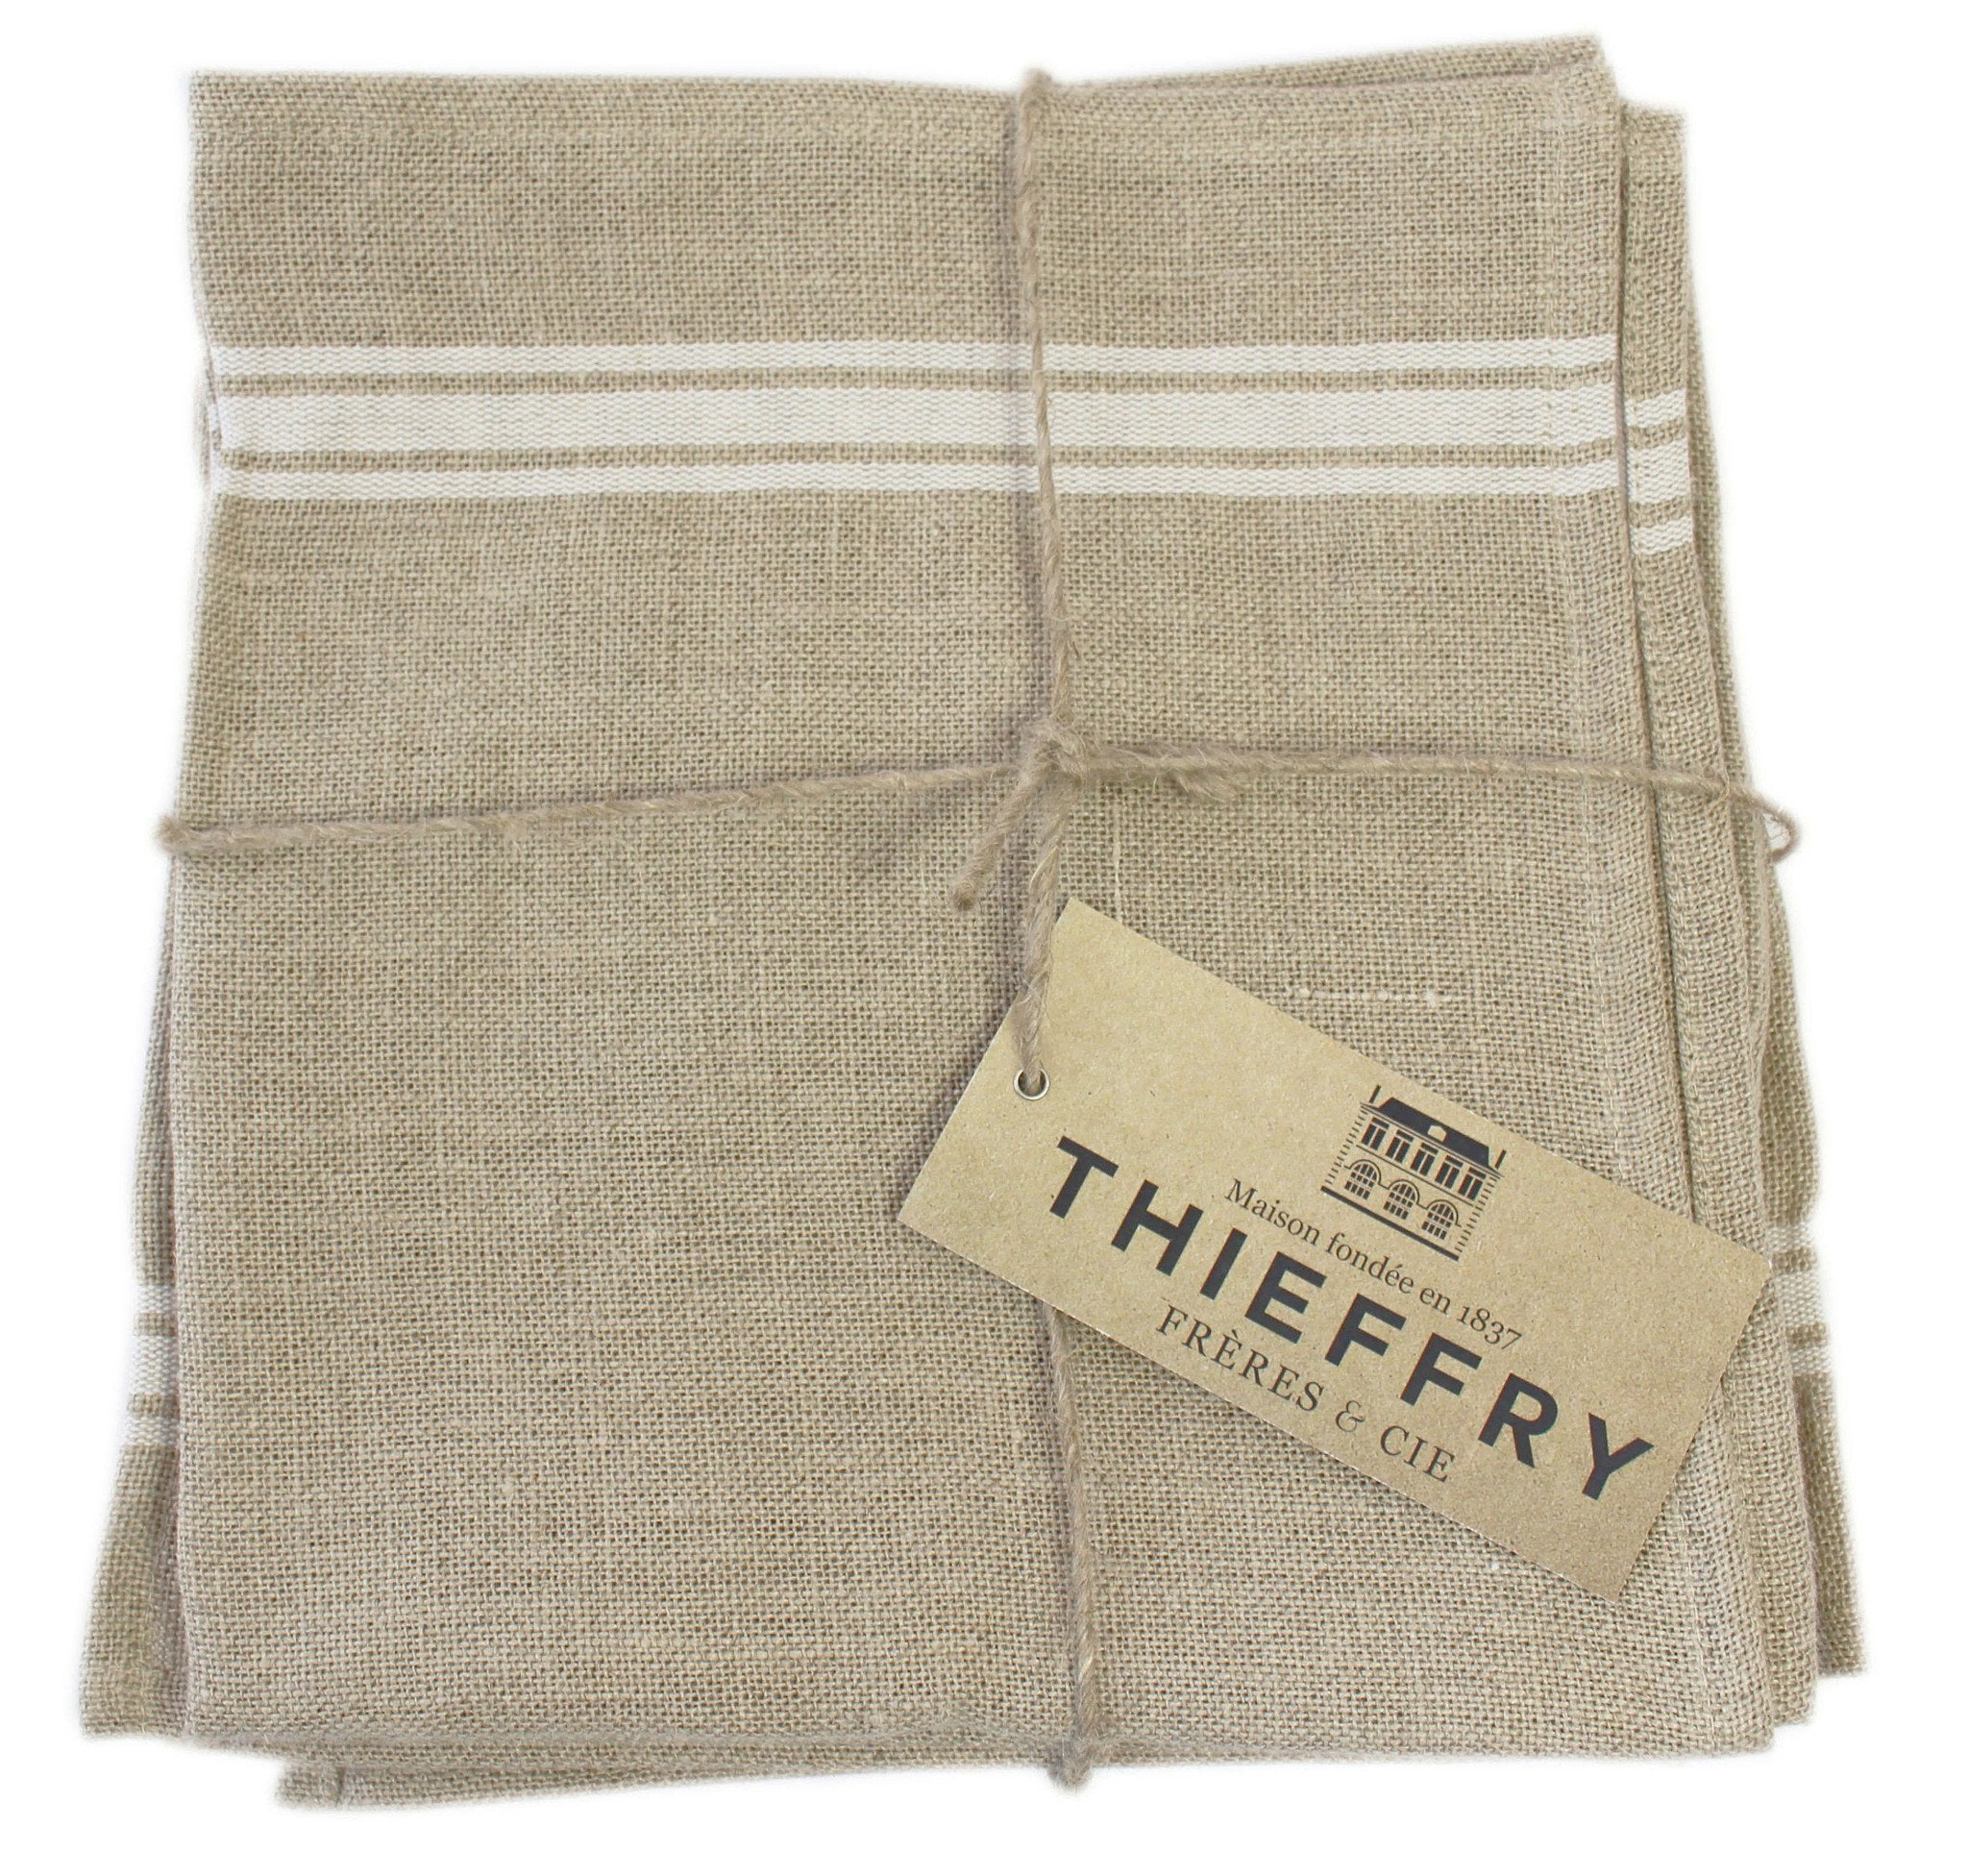 Thieffry White Monogramme Linen Tablecloth (68" x 110") - French Dry Goods